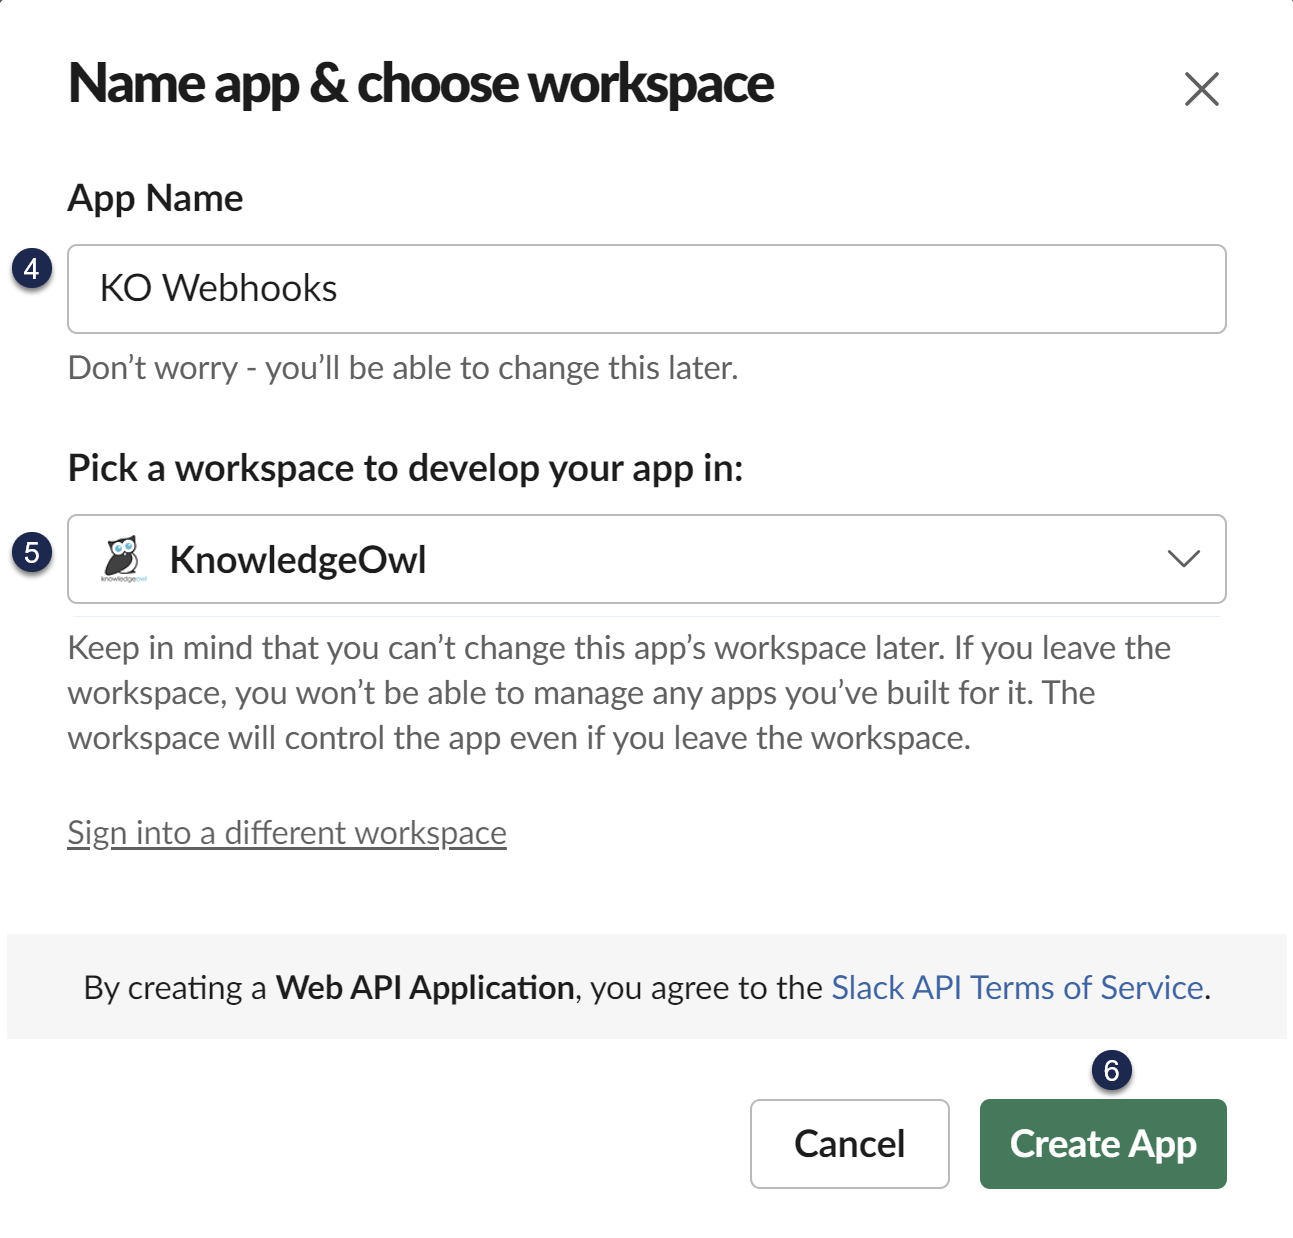 A screenshot of the Name app & choose workspace pop-up with an App Name of KO Webhooks added and the KnowledgeOwl workspace selected